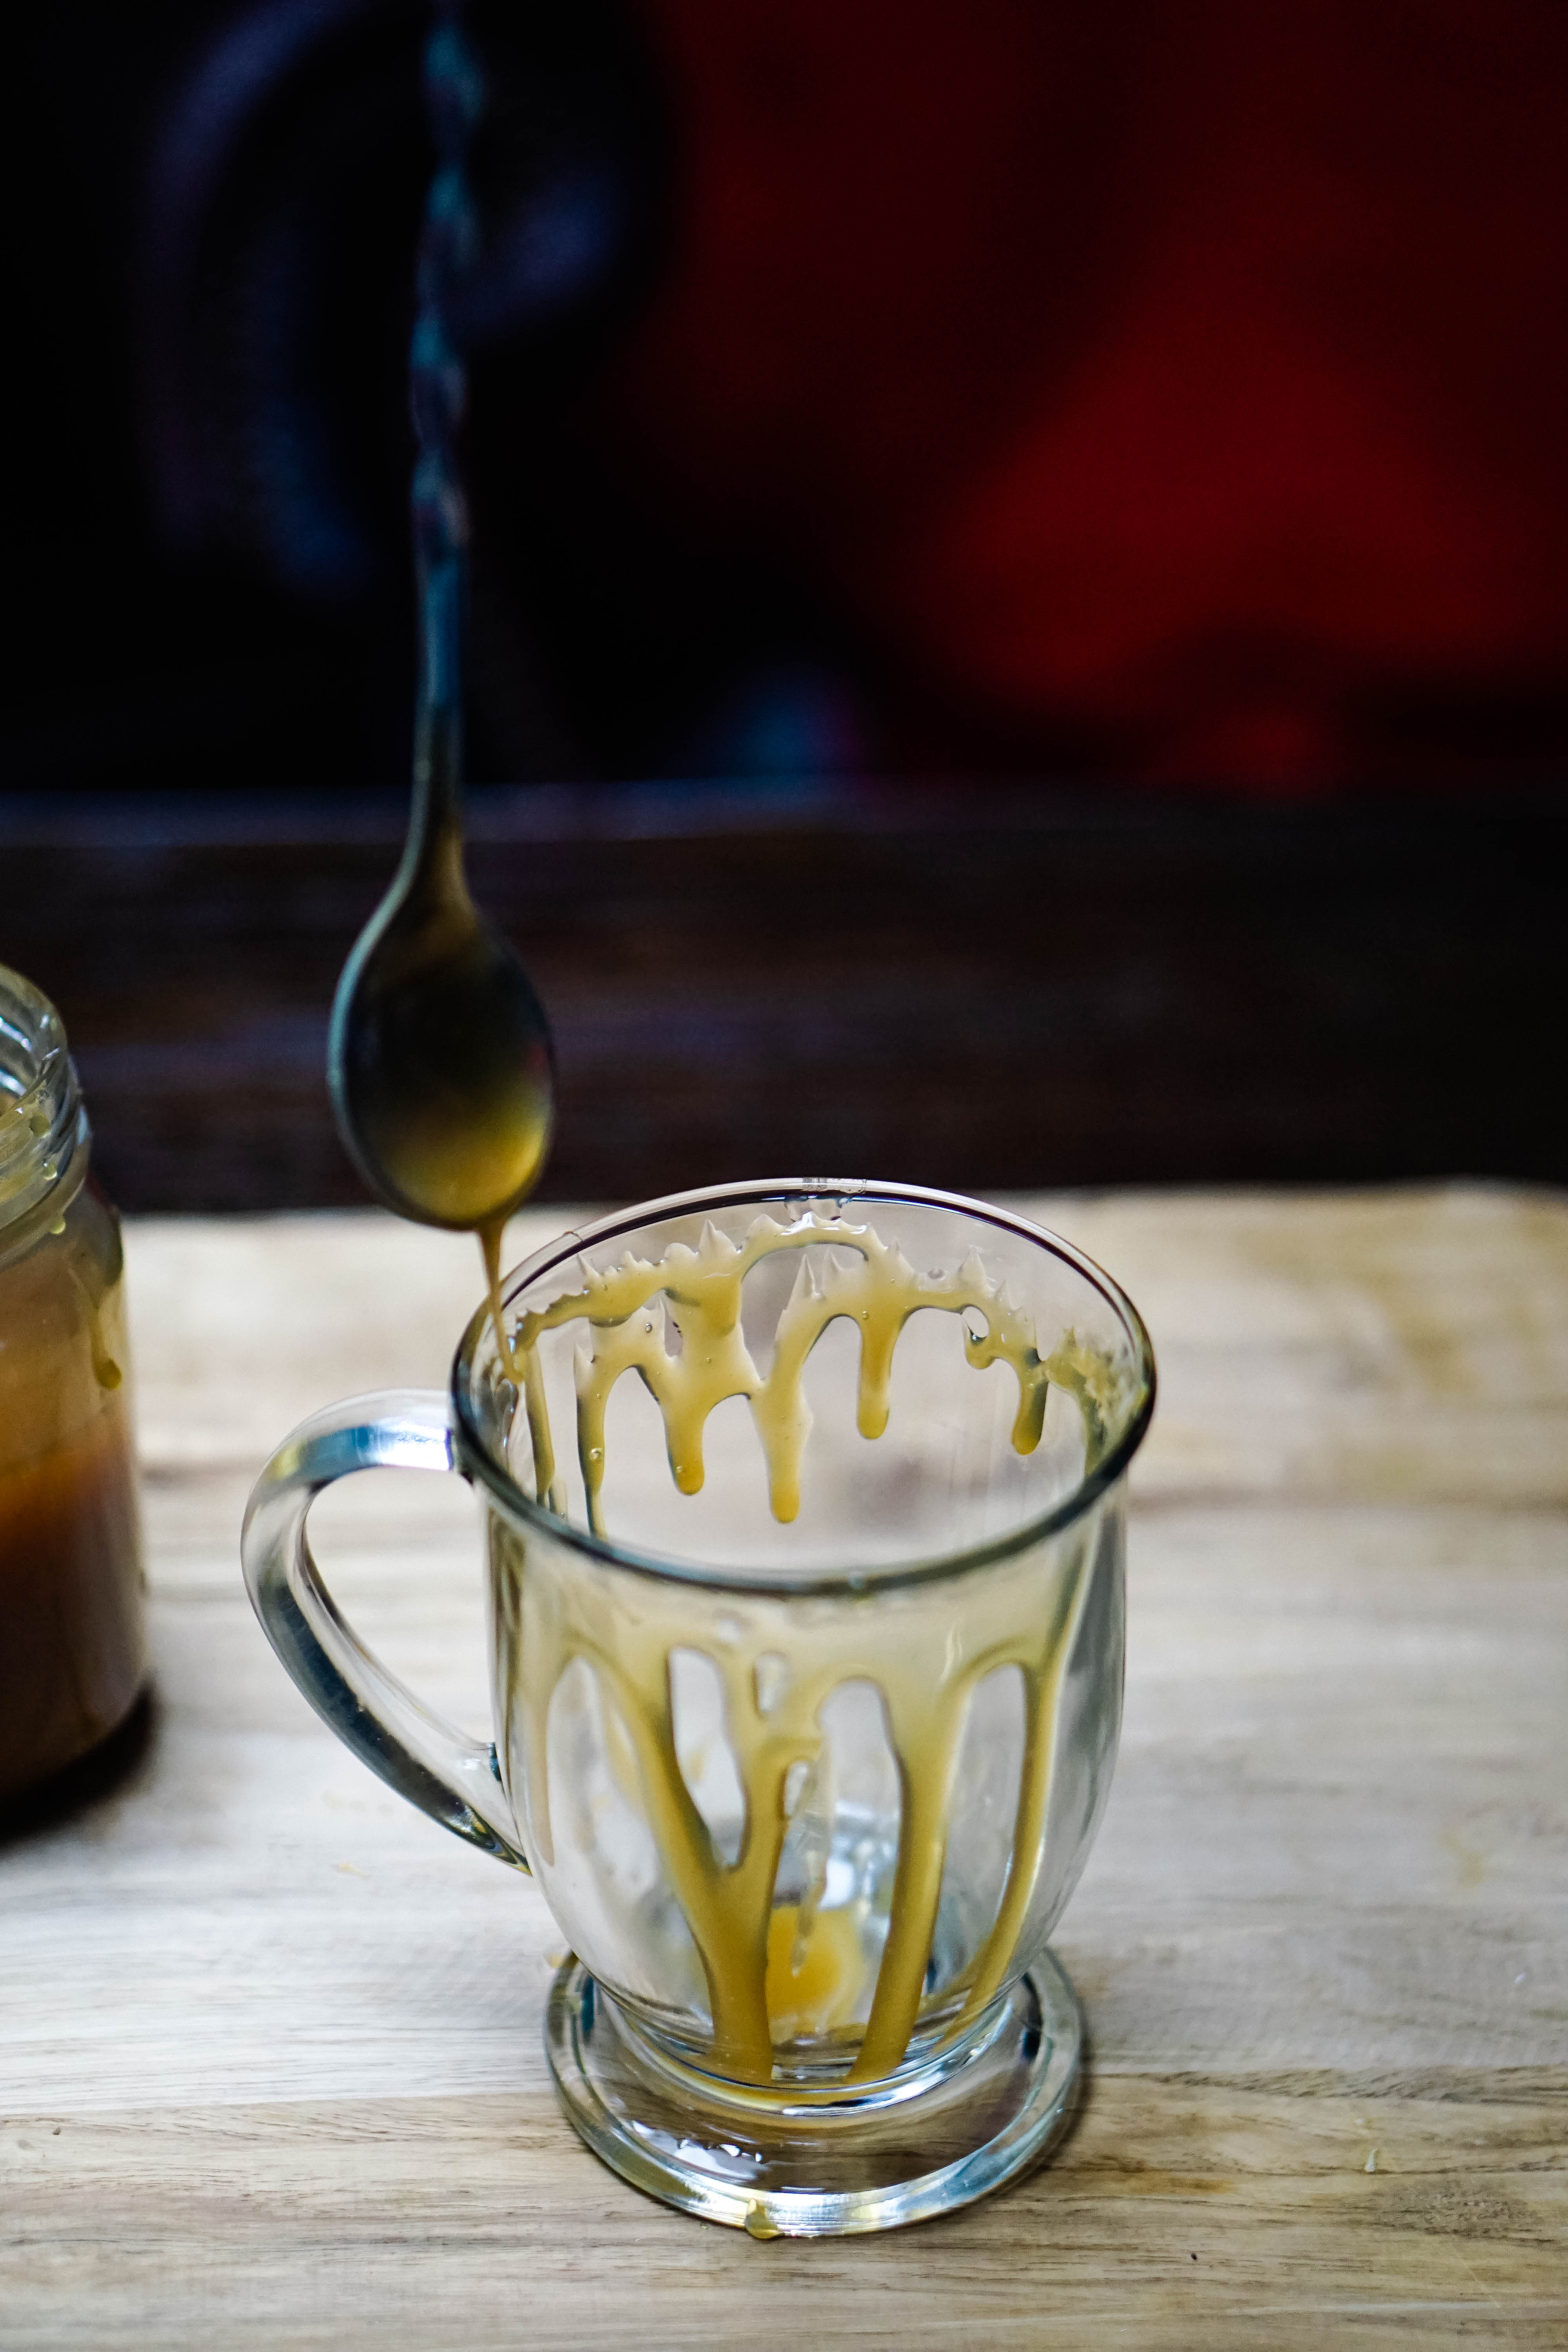 There's nothing like a steamy, Caramel Apple Whiskey Toddy to warm your bones during the cold winter months. Wrap your hands around the mug and enjoy!~By Wet Whistle Drinks by Darla Bentley